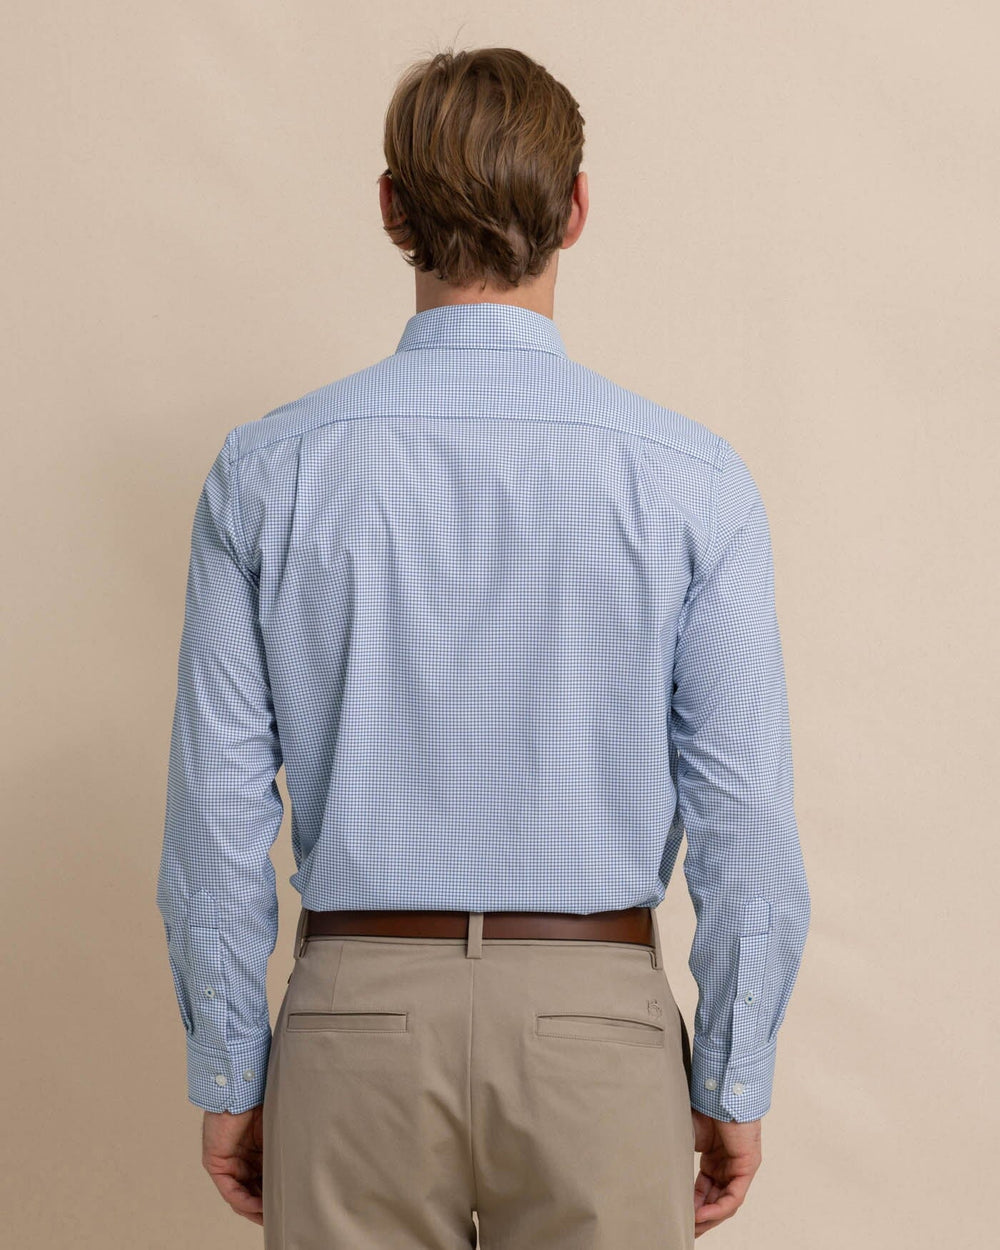 The back view of the Men's Rosemont Brrr® Intercoastal Performance Sport Shirt by Southern Tide - Seven Seas Blue